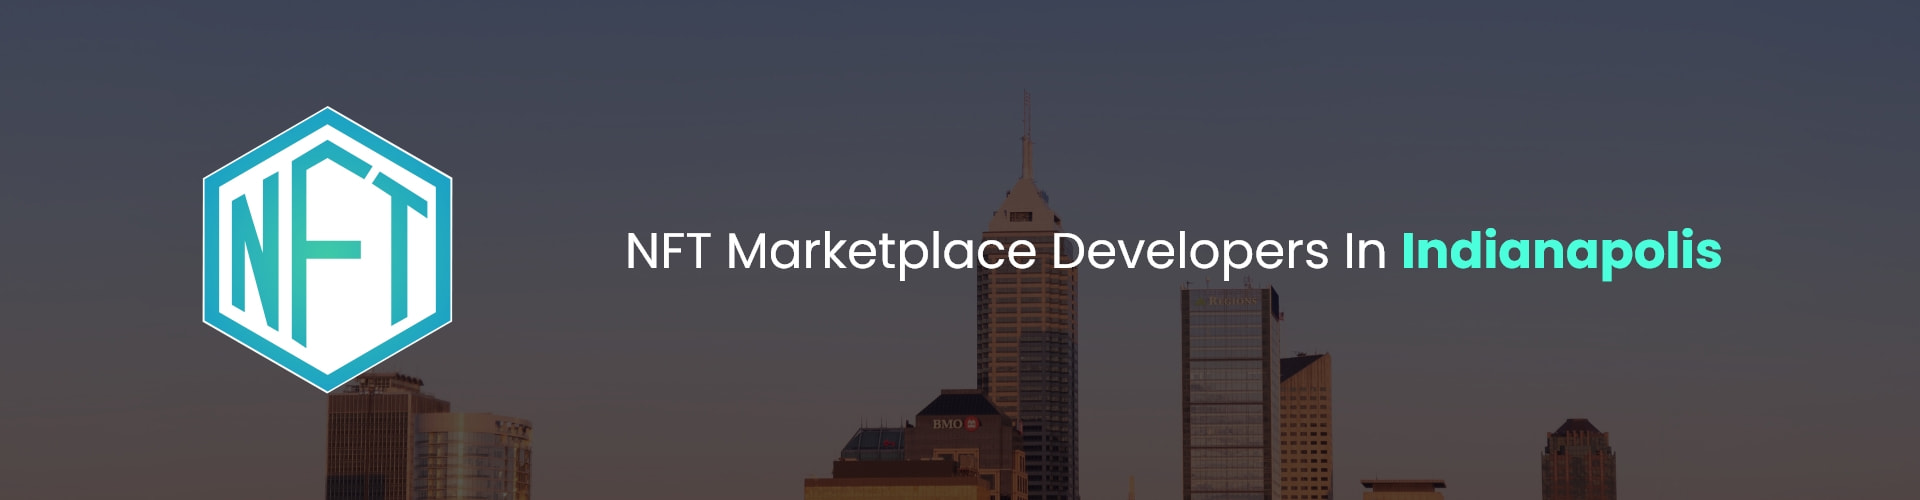 hire nft marketplace developers in indianapolis